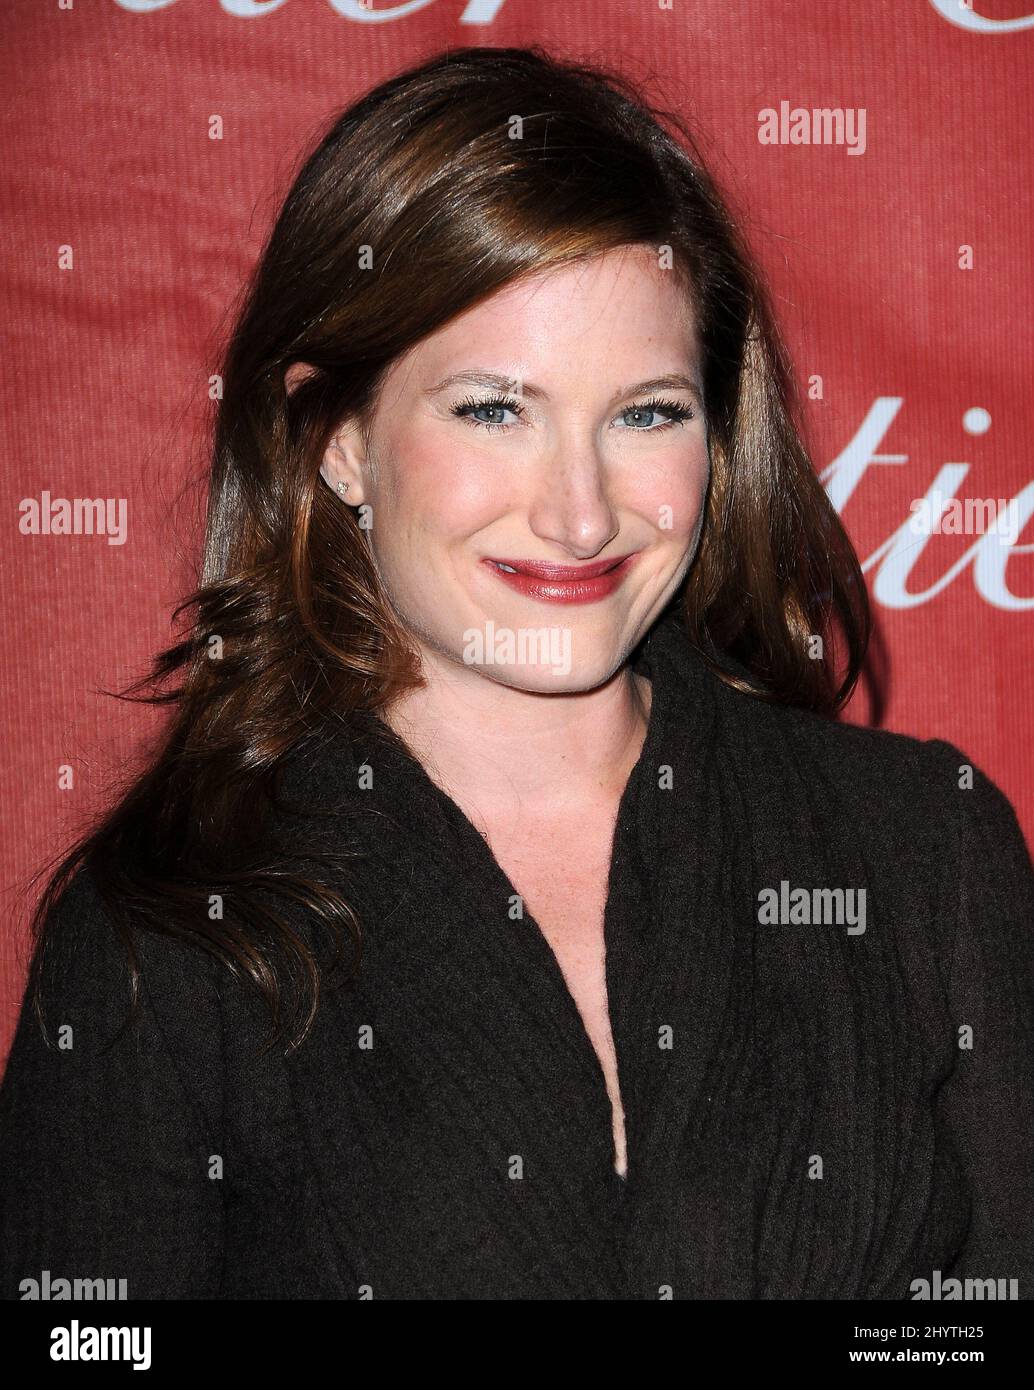 Kathryn Hahn attends the 20th Annual Palm Springs International Film Festival Awards Gala at the Palm Springs Convention Center Stock Photo